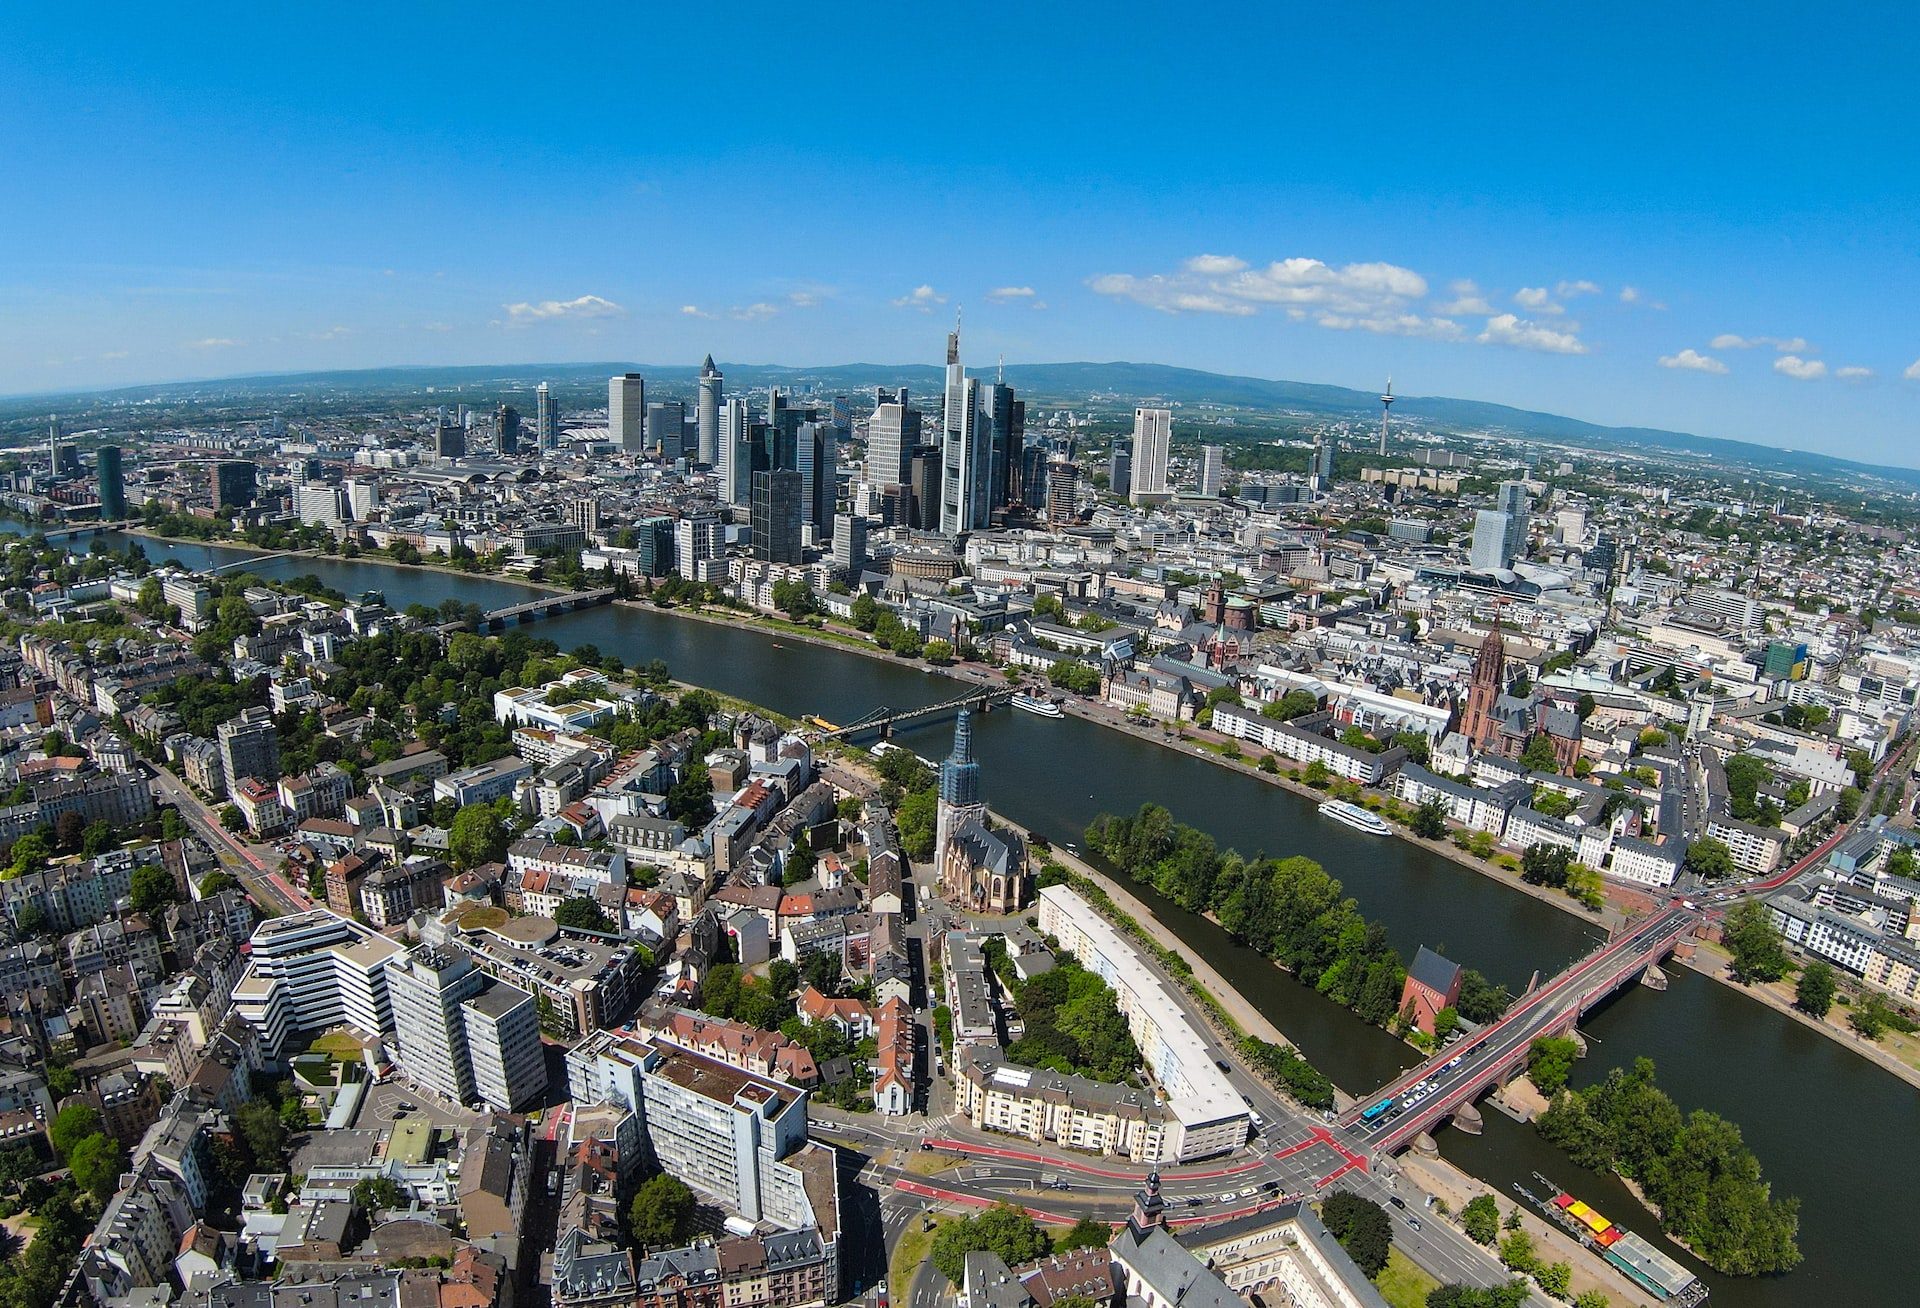 Located on the south bank of the Main River in central Frankfurt, the Sachsenhausen district is one of the most interesting in the city.